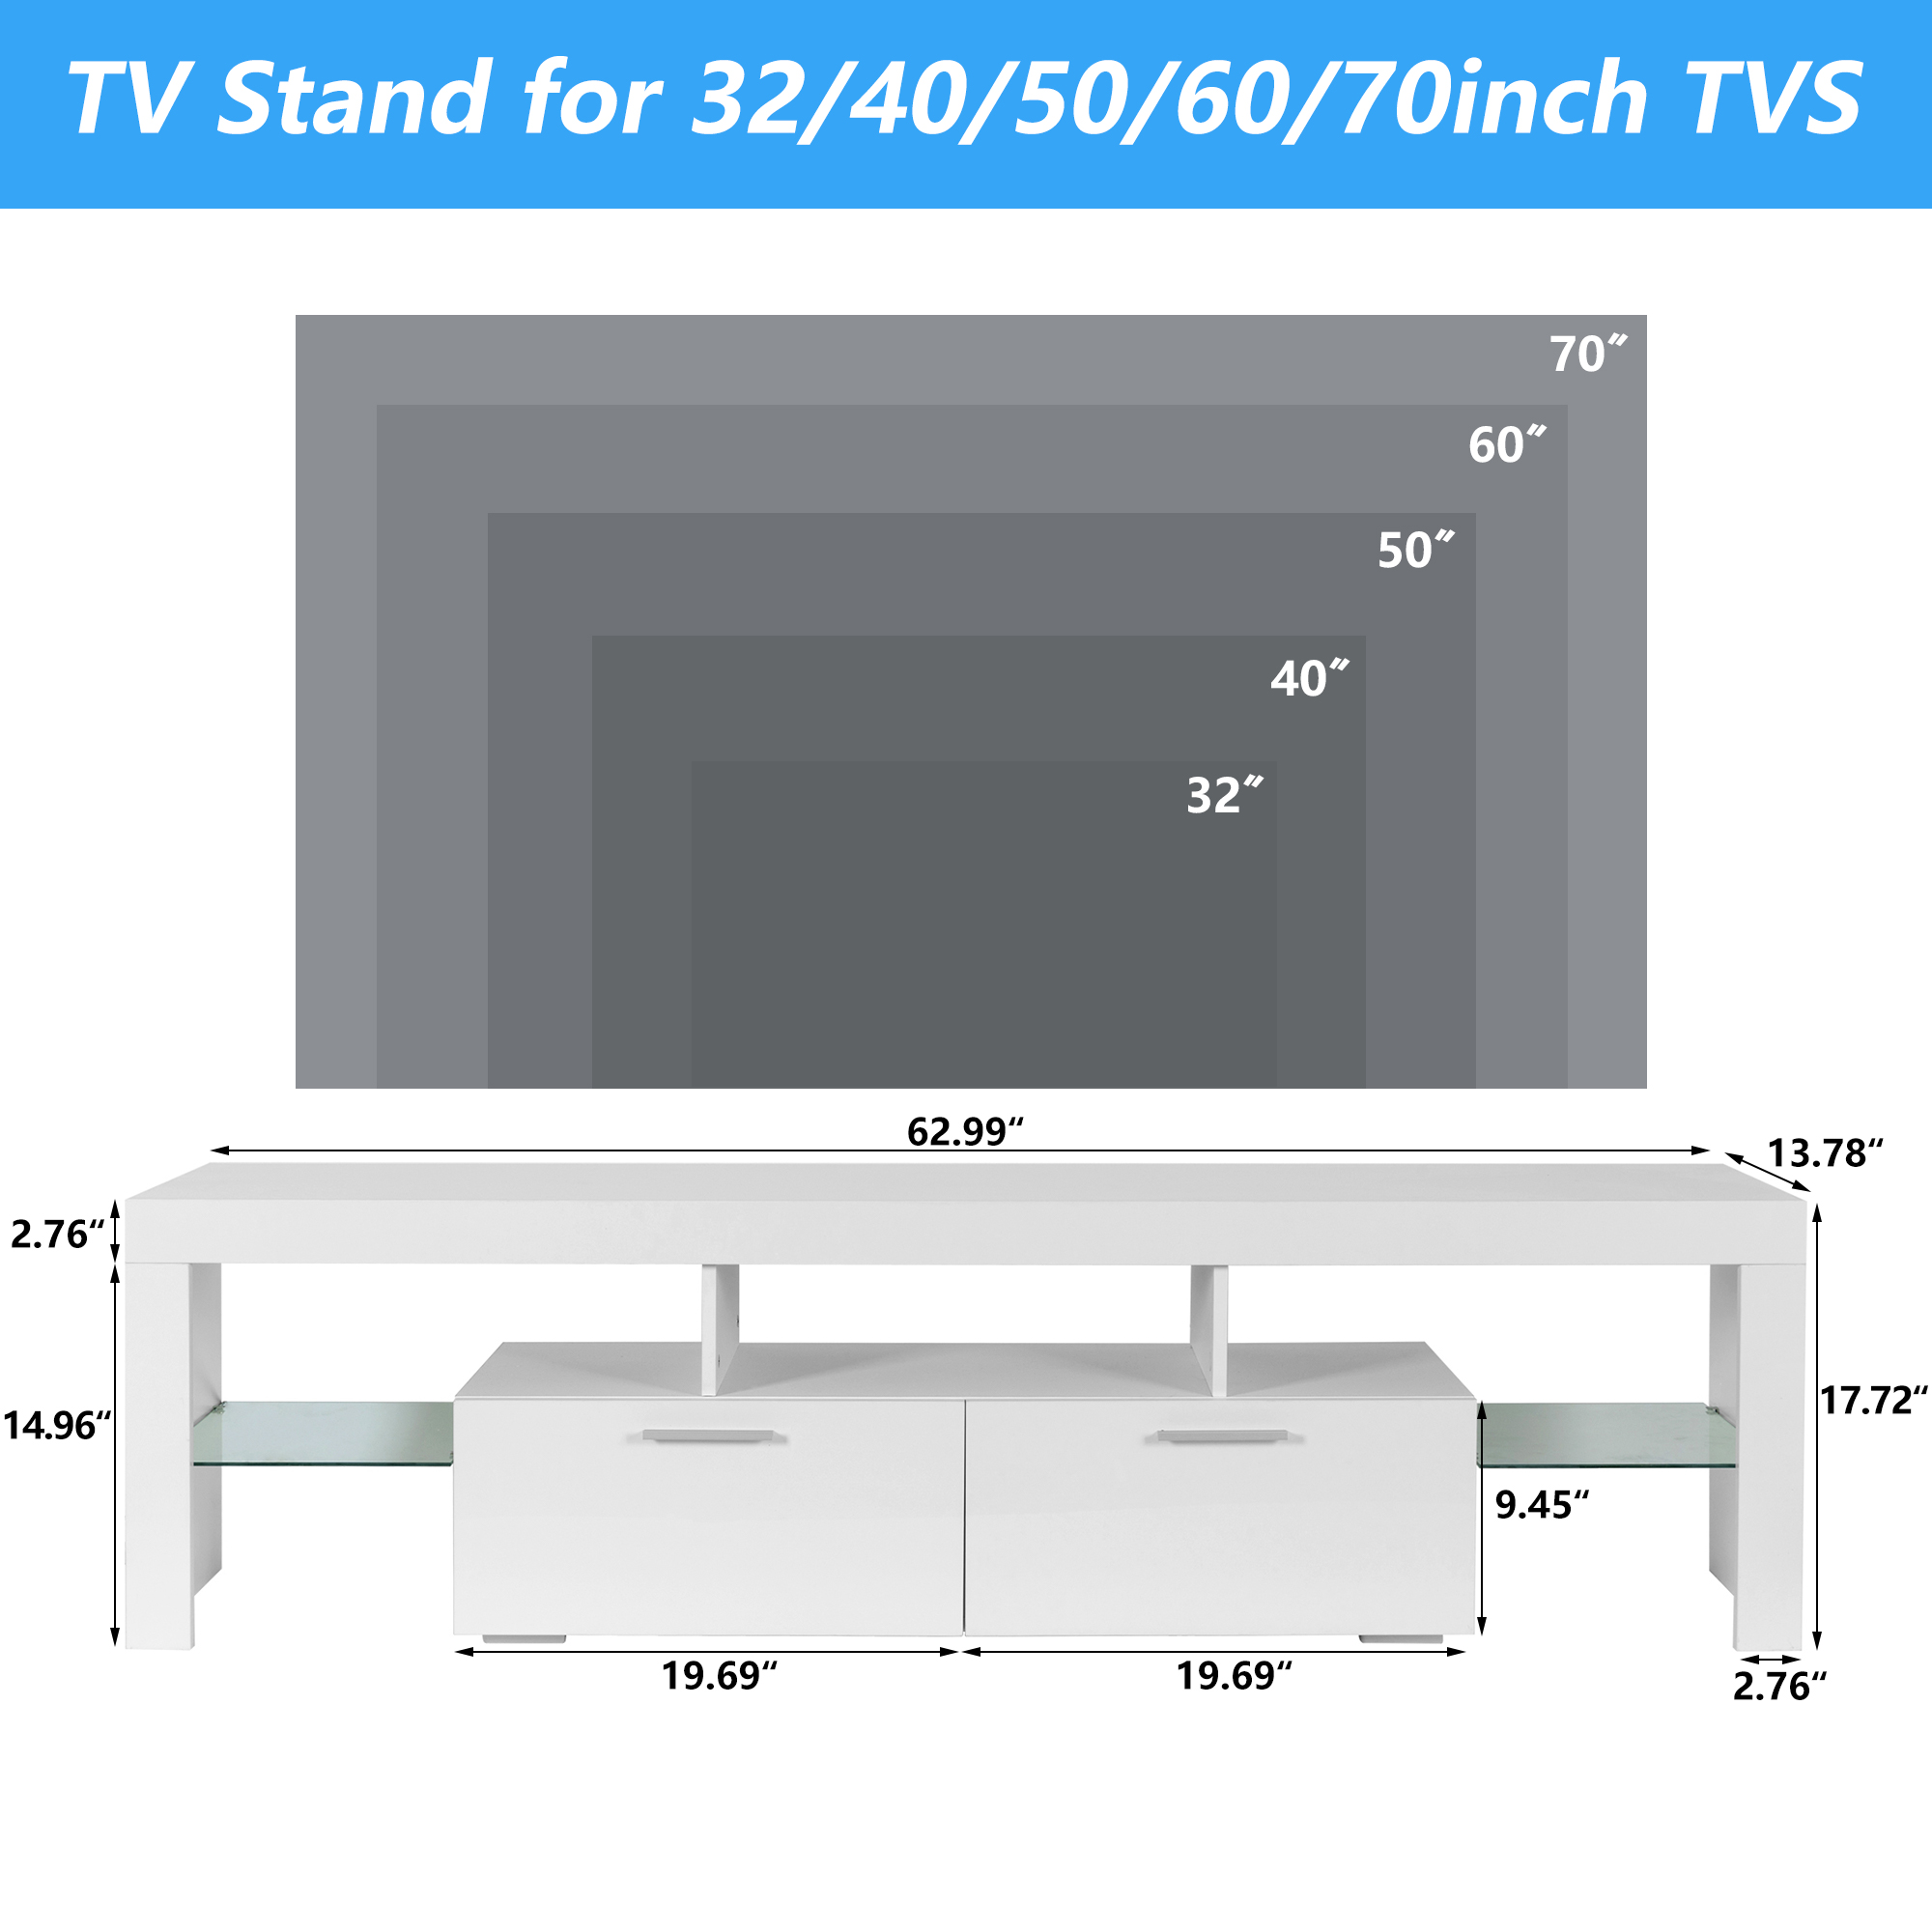 uhomepro TV Stand for TVs up to 70